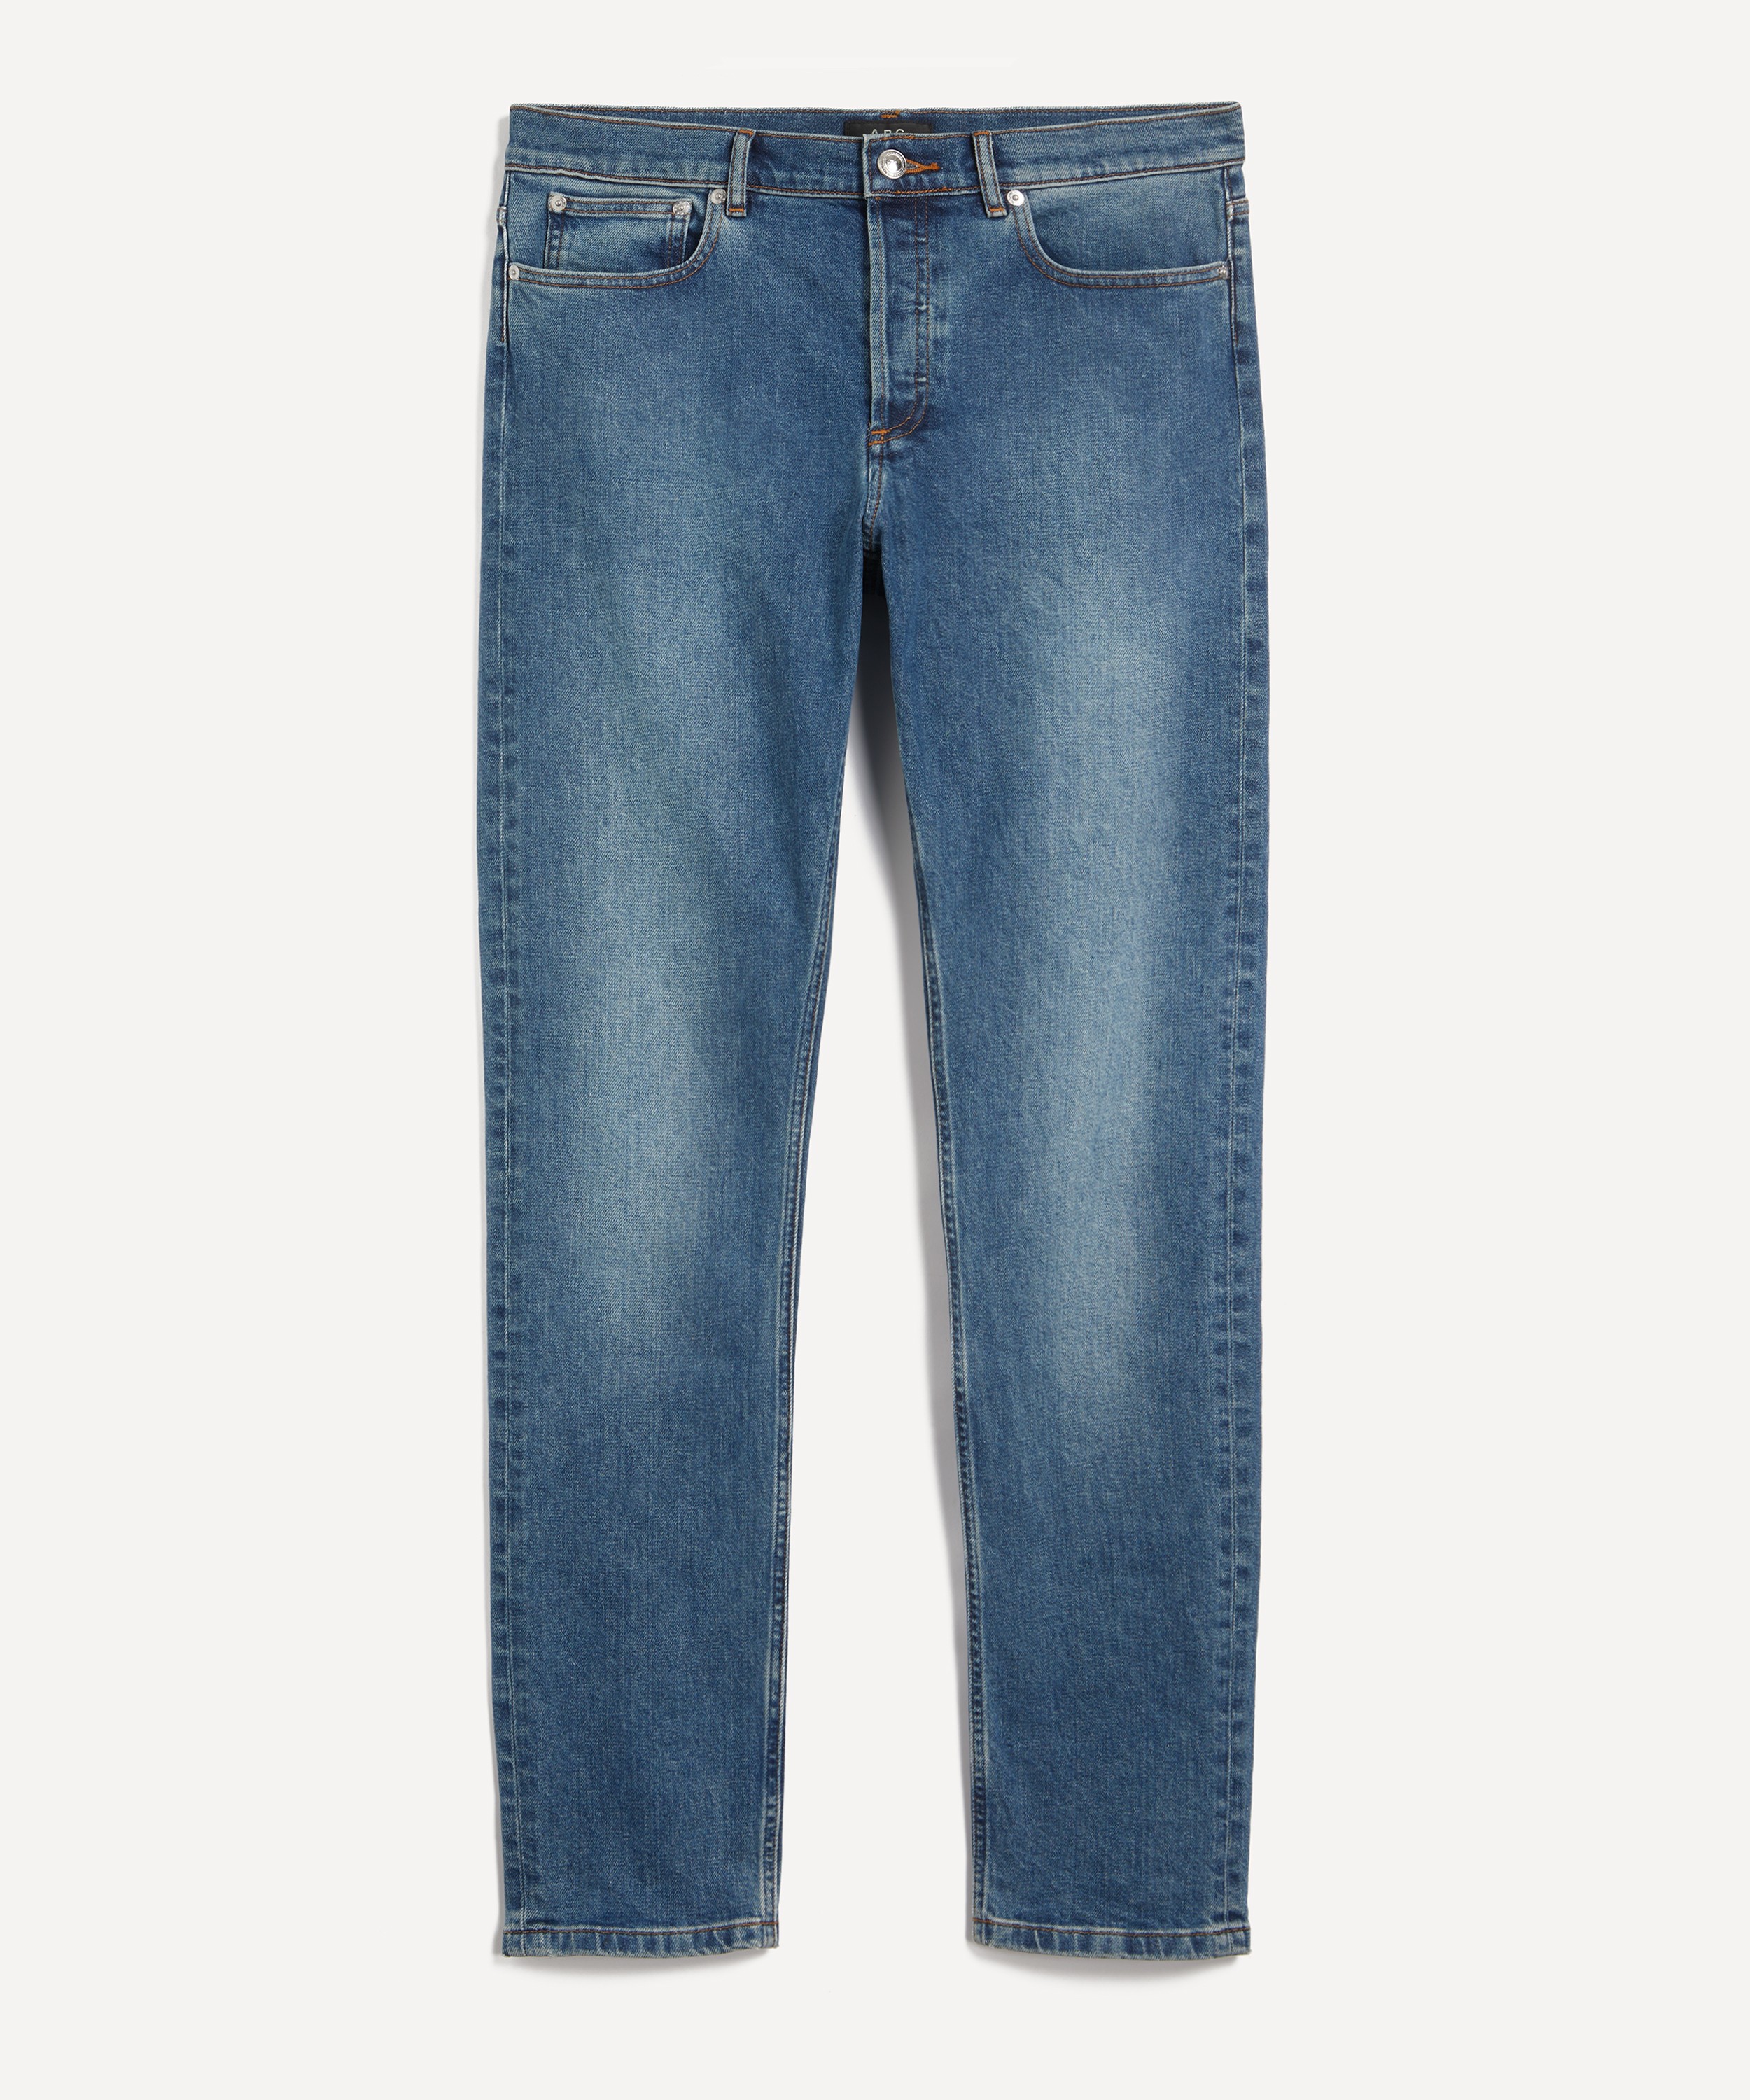 A.P.C. - Petit New Standard Jeans image number null